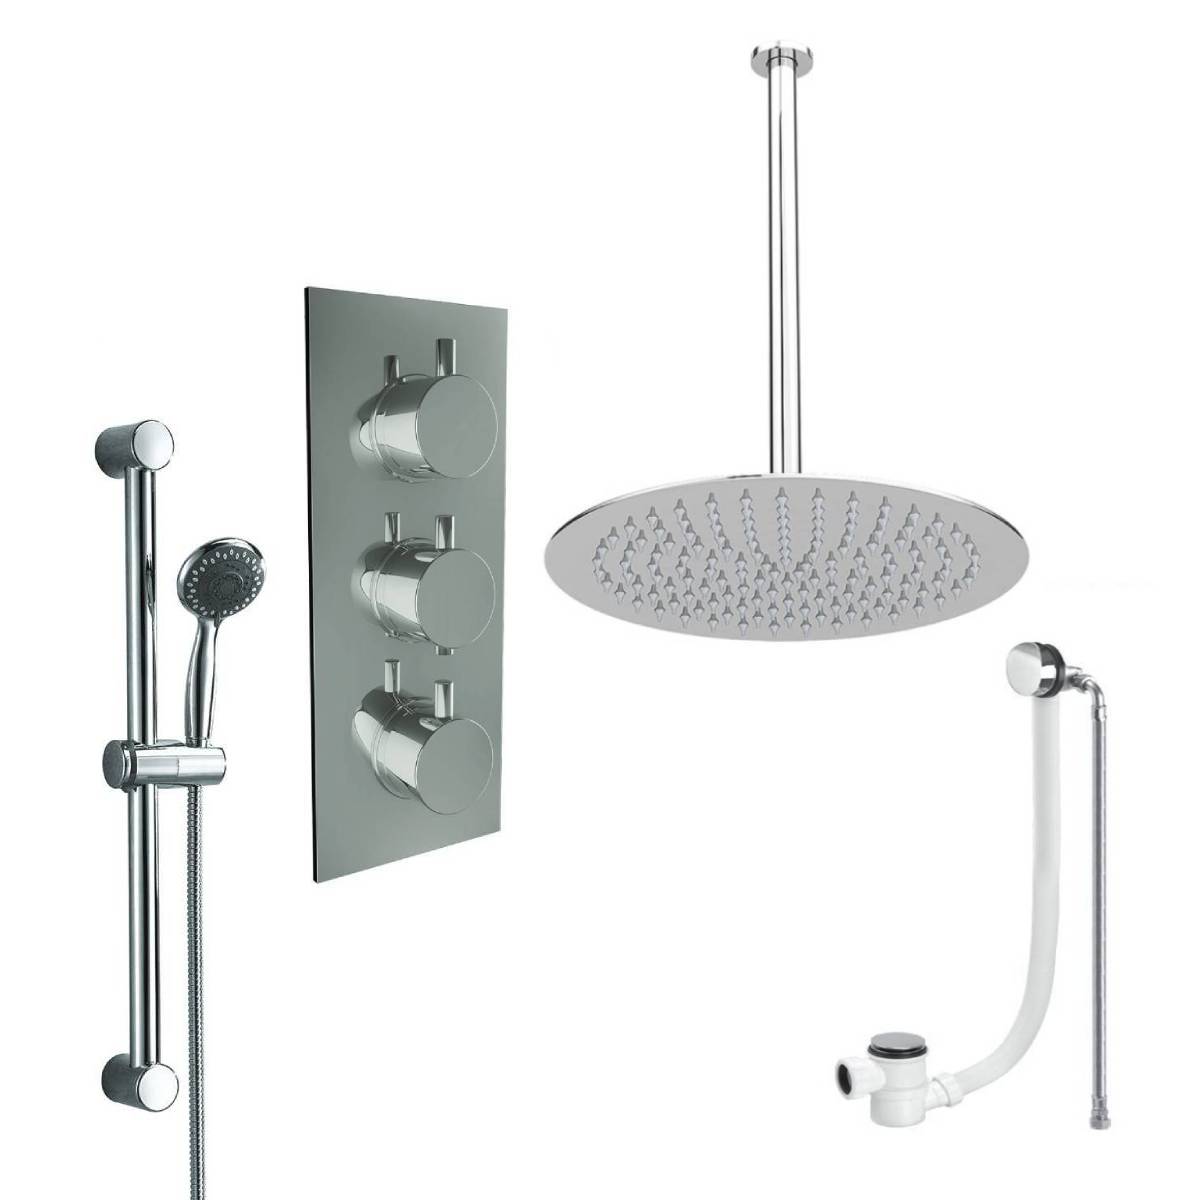 Round Triple Thermostatic Concealed Mixer Shower Kit with Ceiling Mounted 200mm Shower Head, Slide Rail Kit & Overflow Filler (12489)